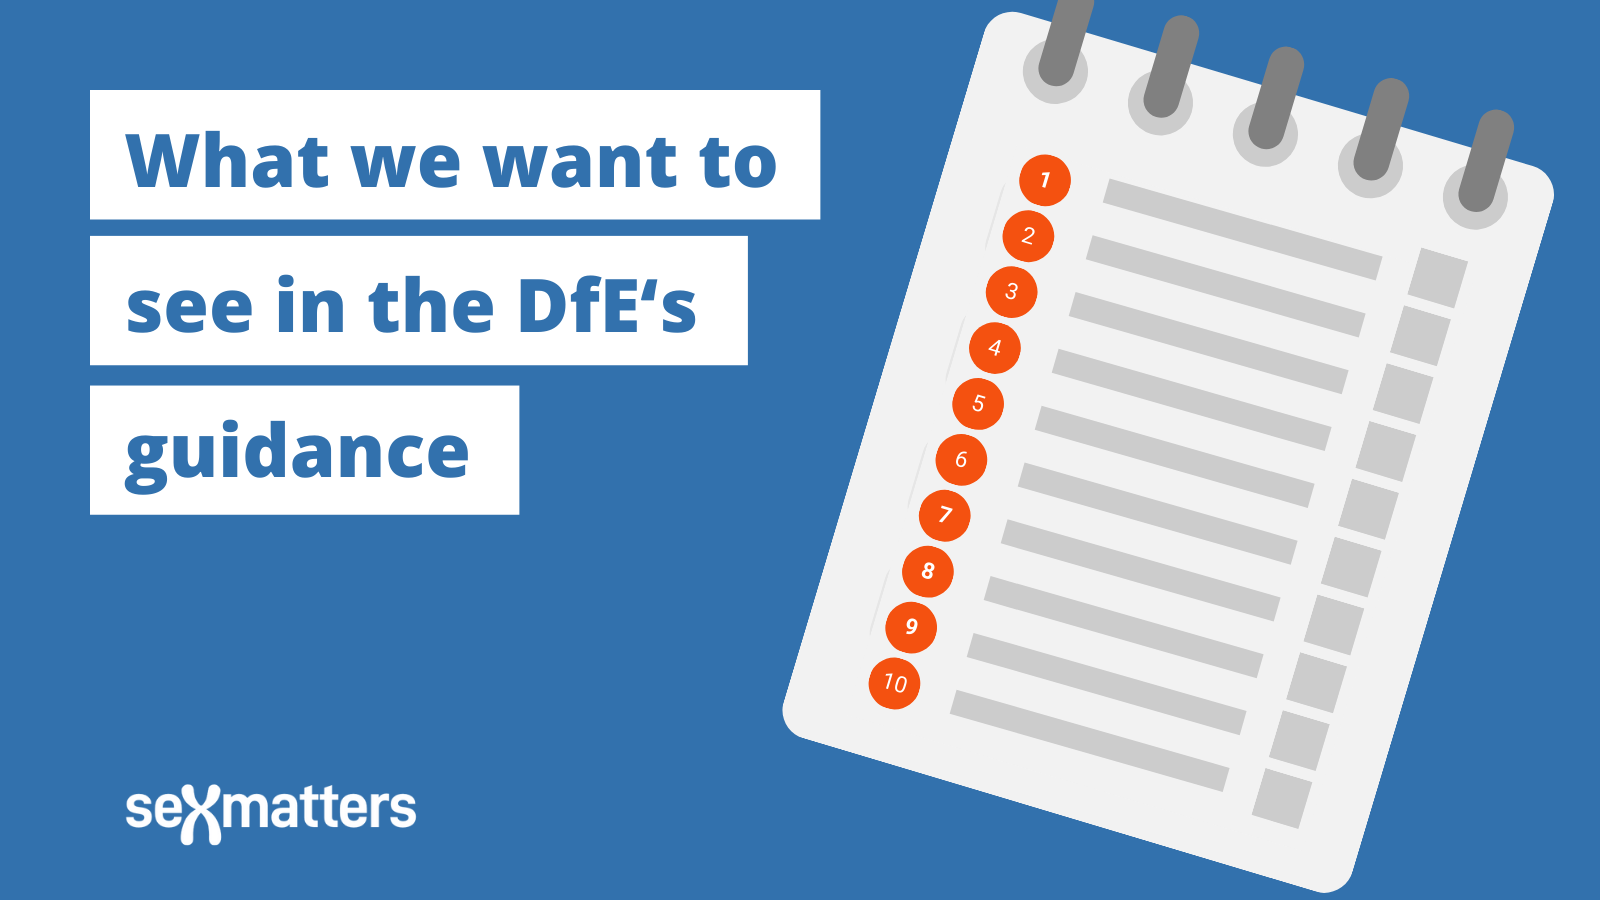 What we want to see in the DFE's guidance